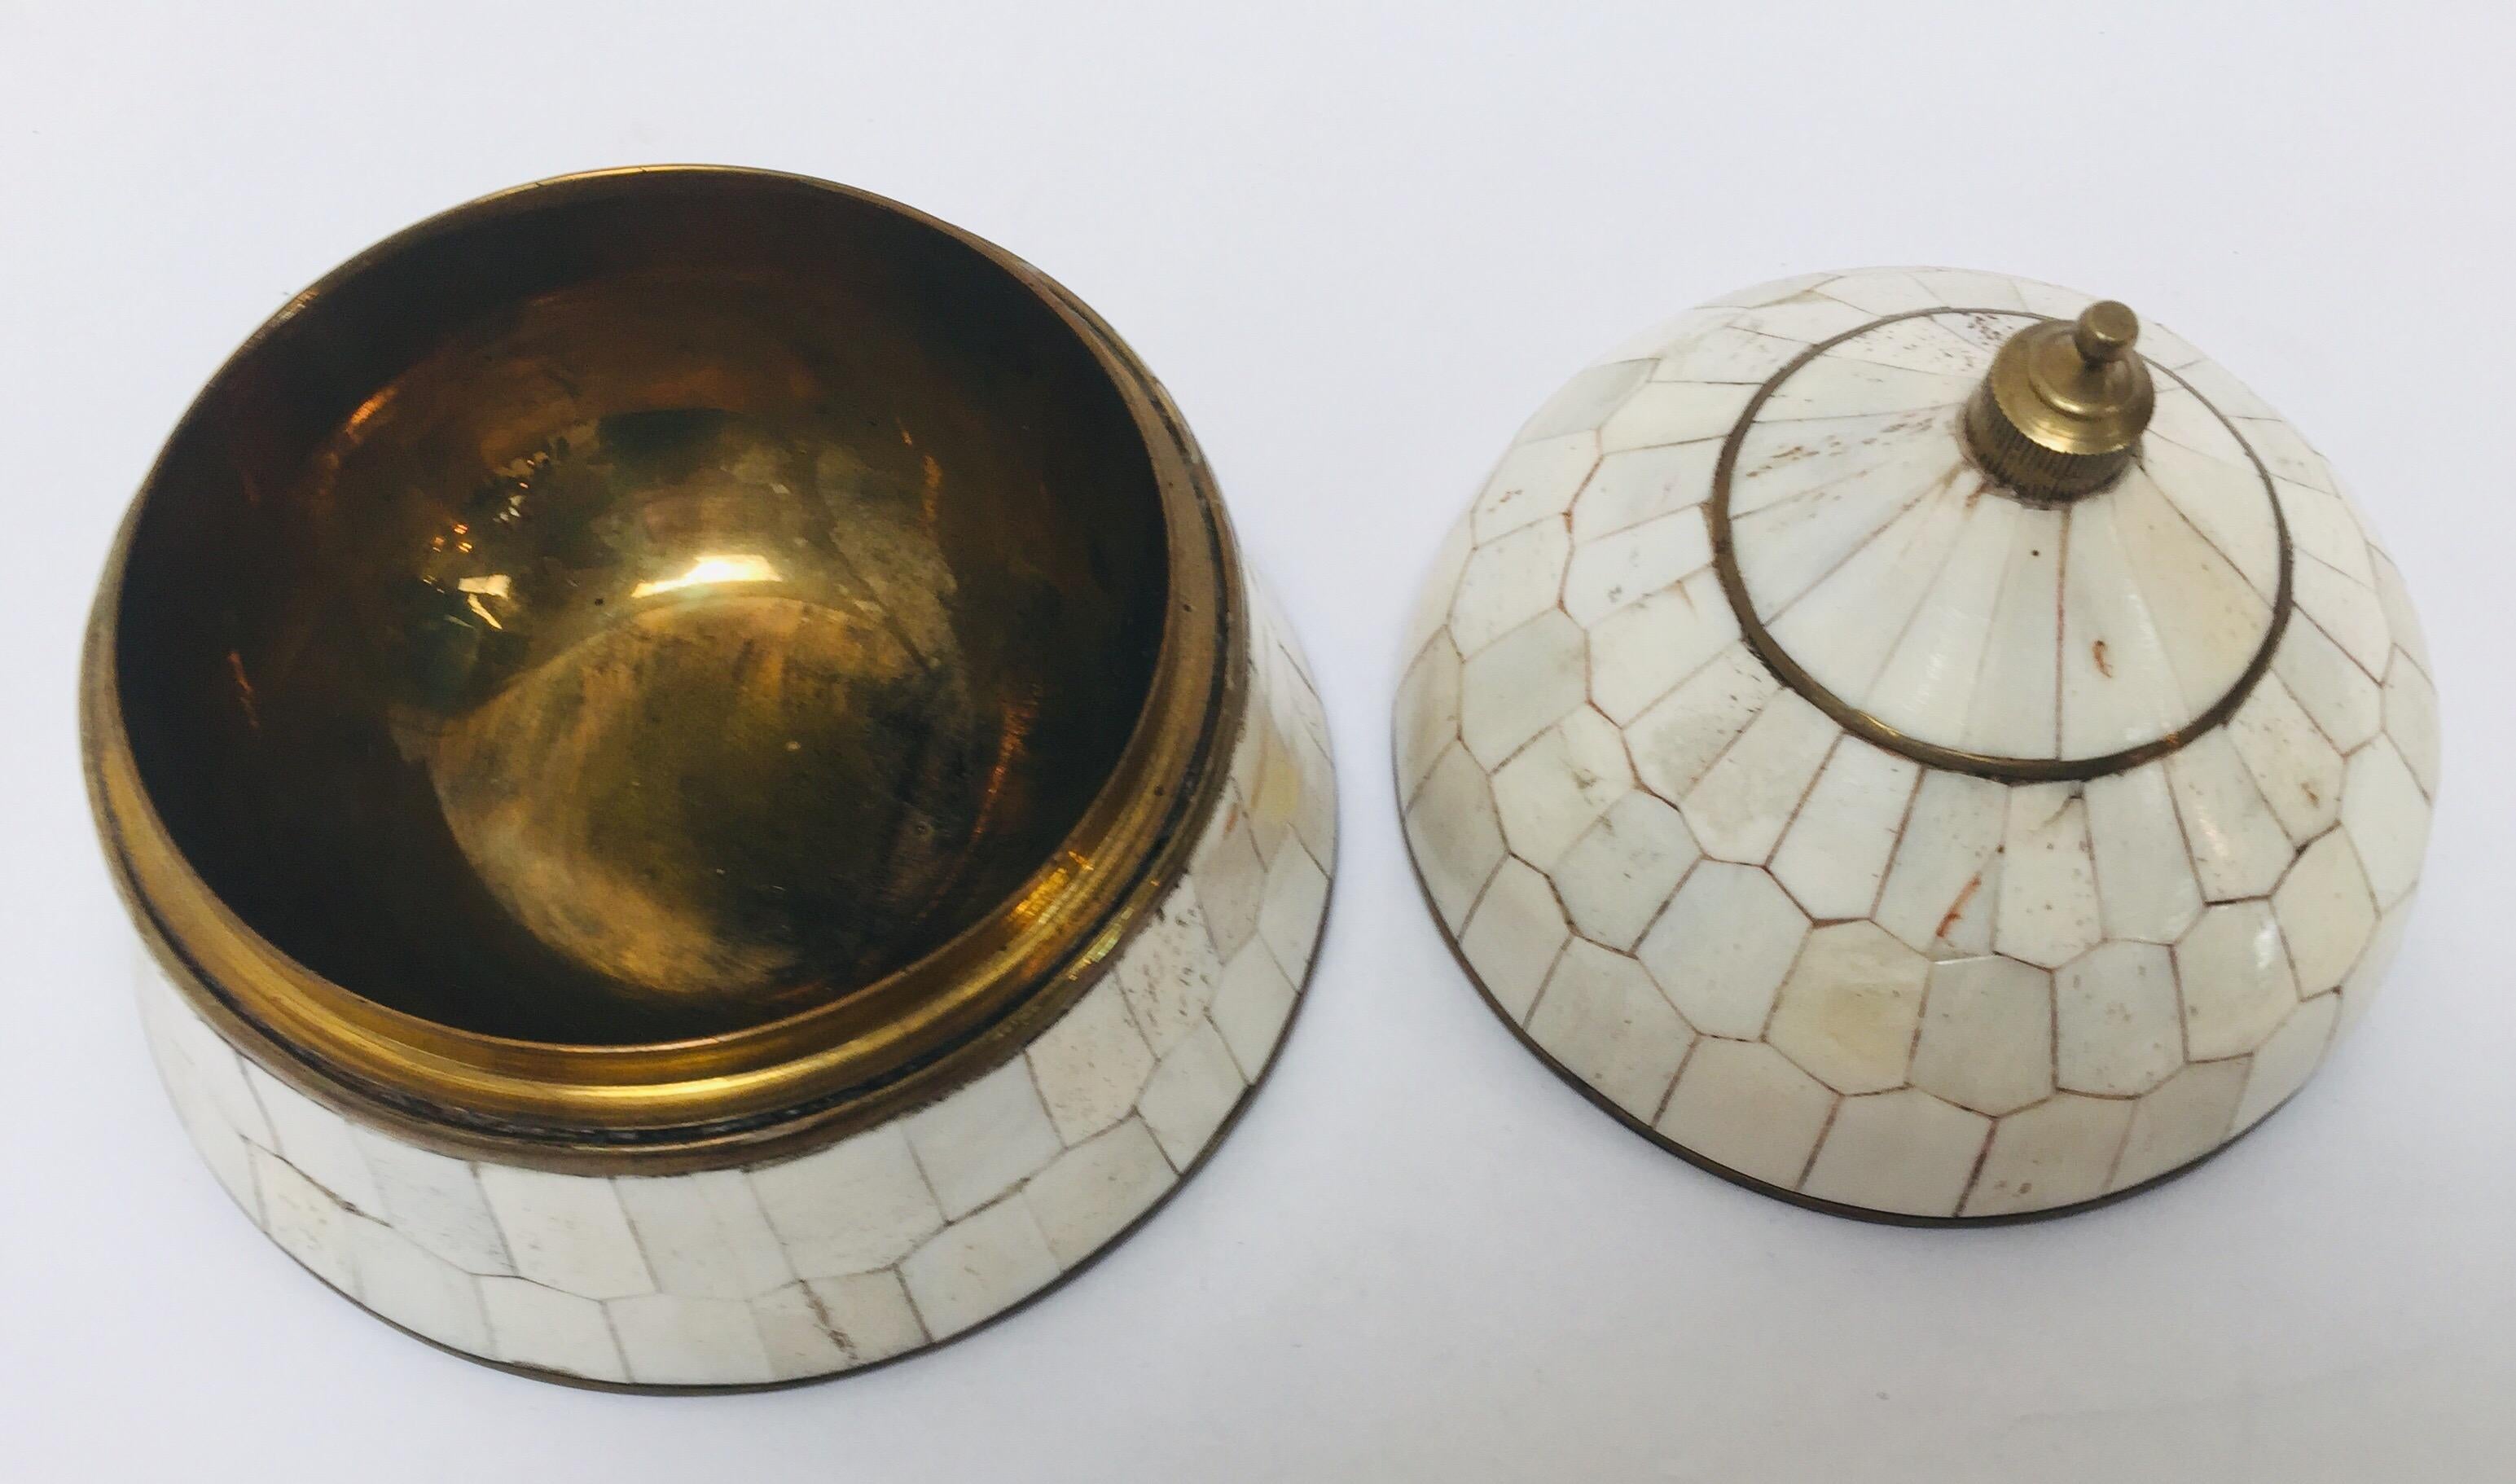 Moroccan decorative round bell shaped lidded box inlaid with bone and brass.
Stylish round bell shaped Moorish trinket lidded box handcrafted with polished brass and bone inlaid, brass lined inside.
Moroccan lidded box handcrafted in Marrakech,